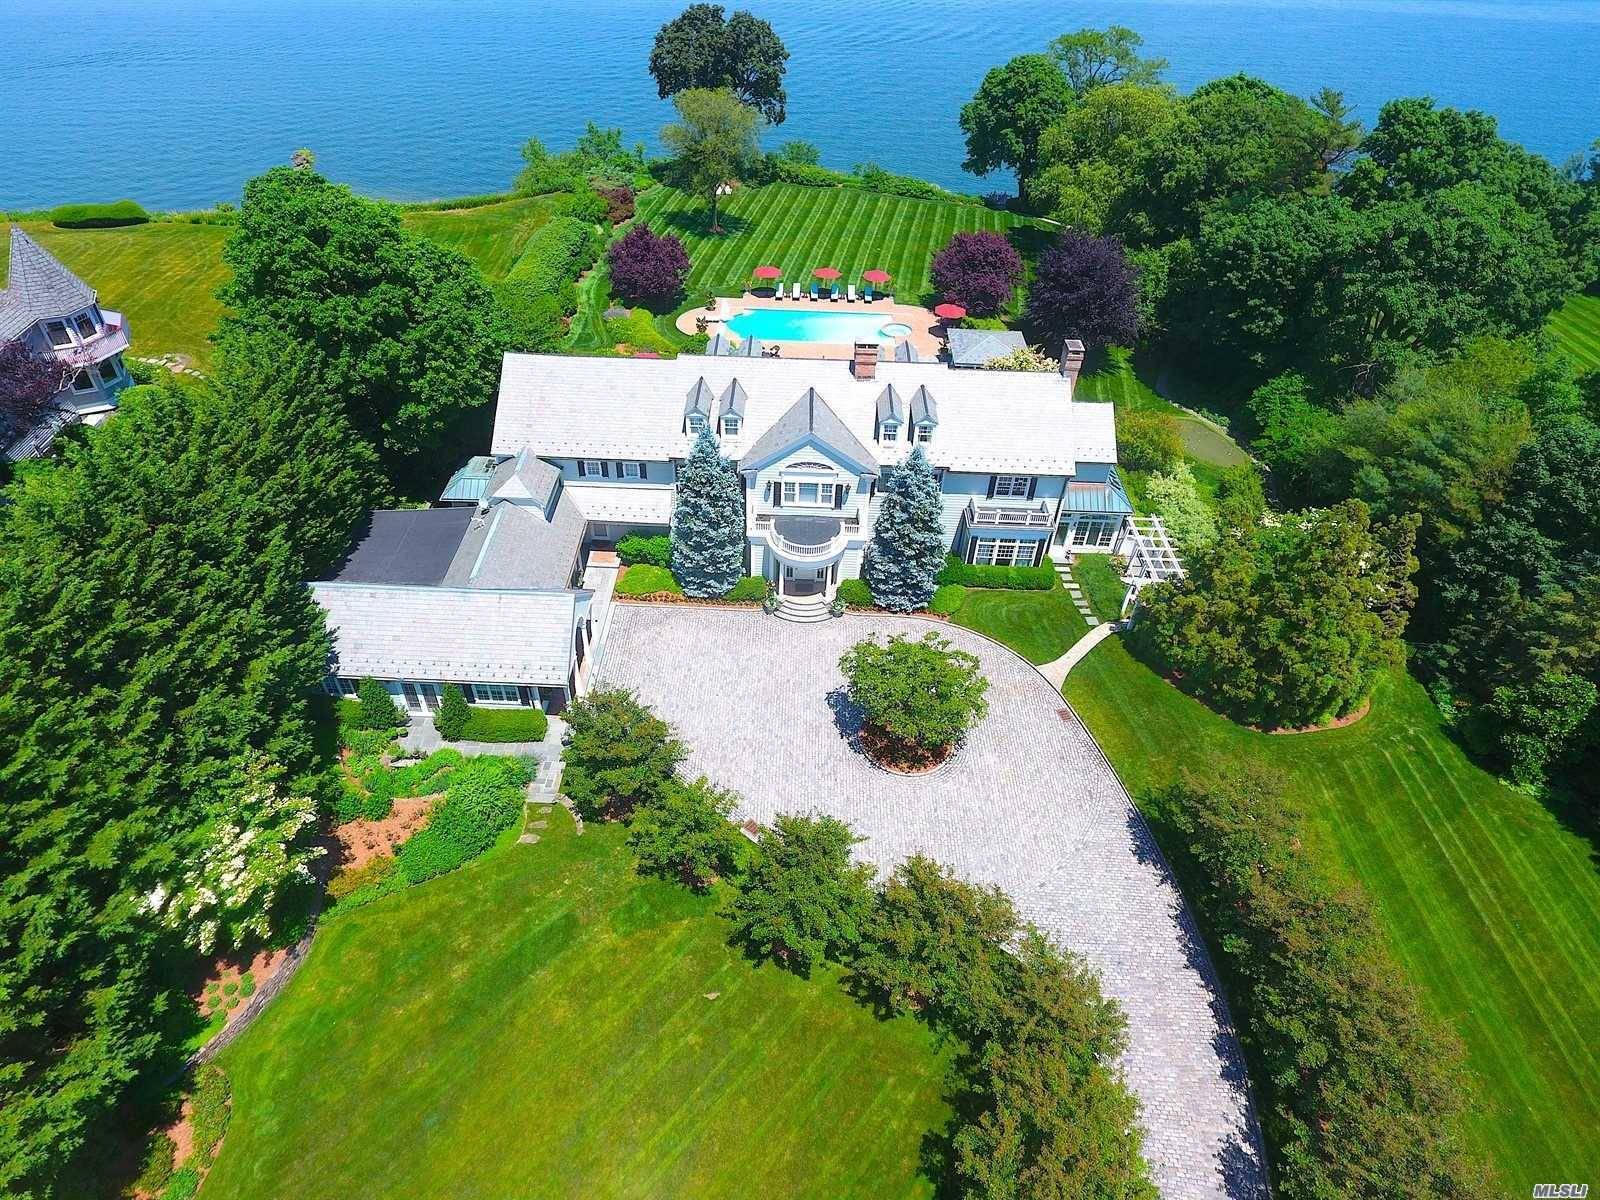 Overlooking Huntington Bay, 6 Wincoma Drive is an exceptional waterfront home on 2.